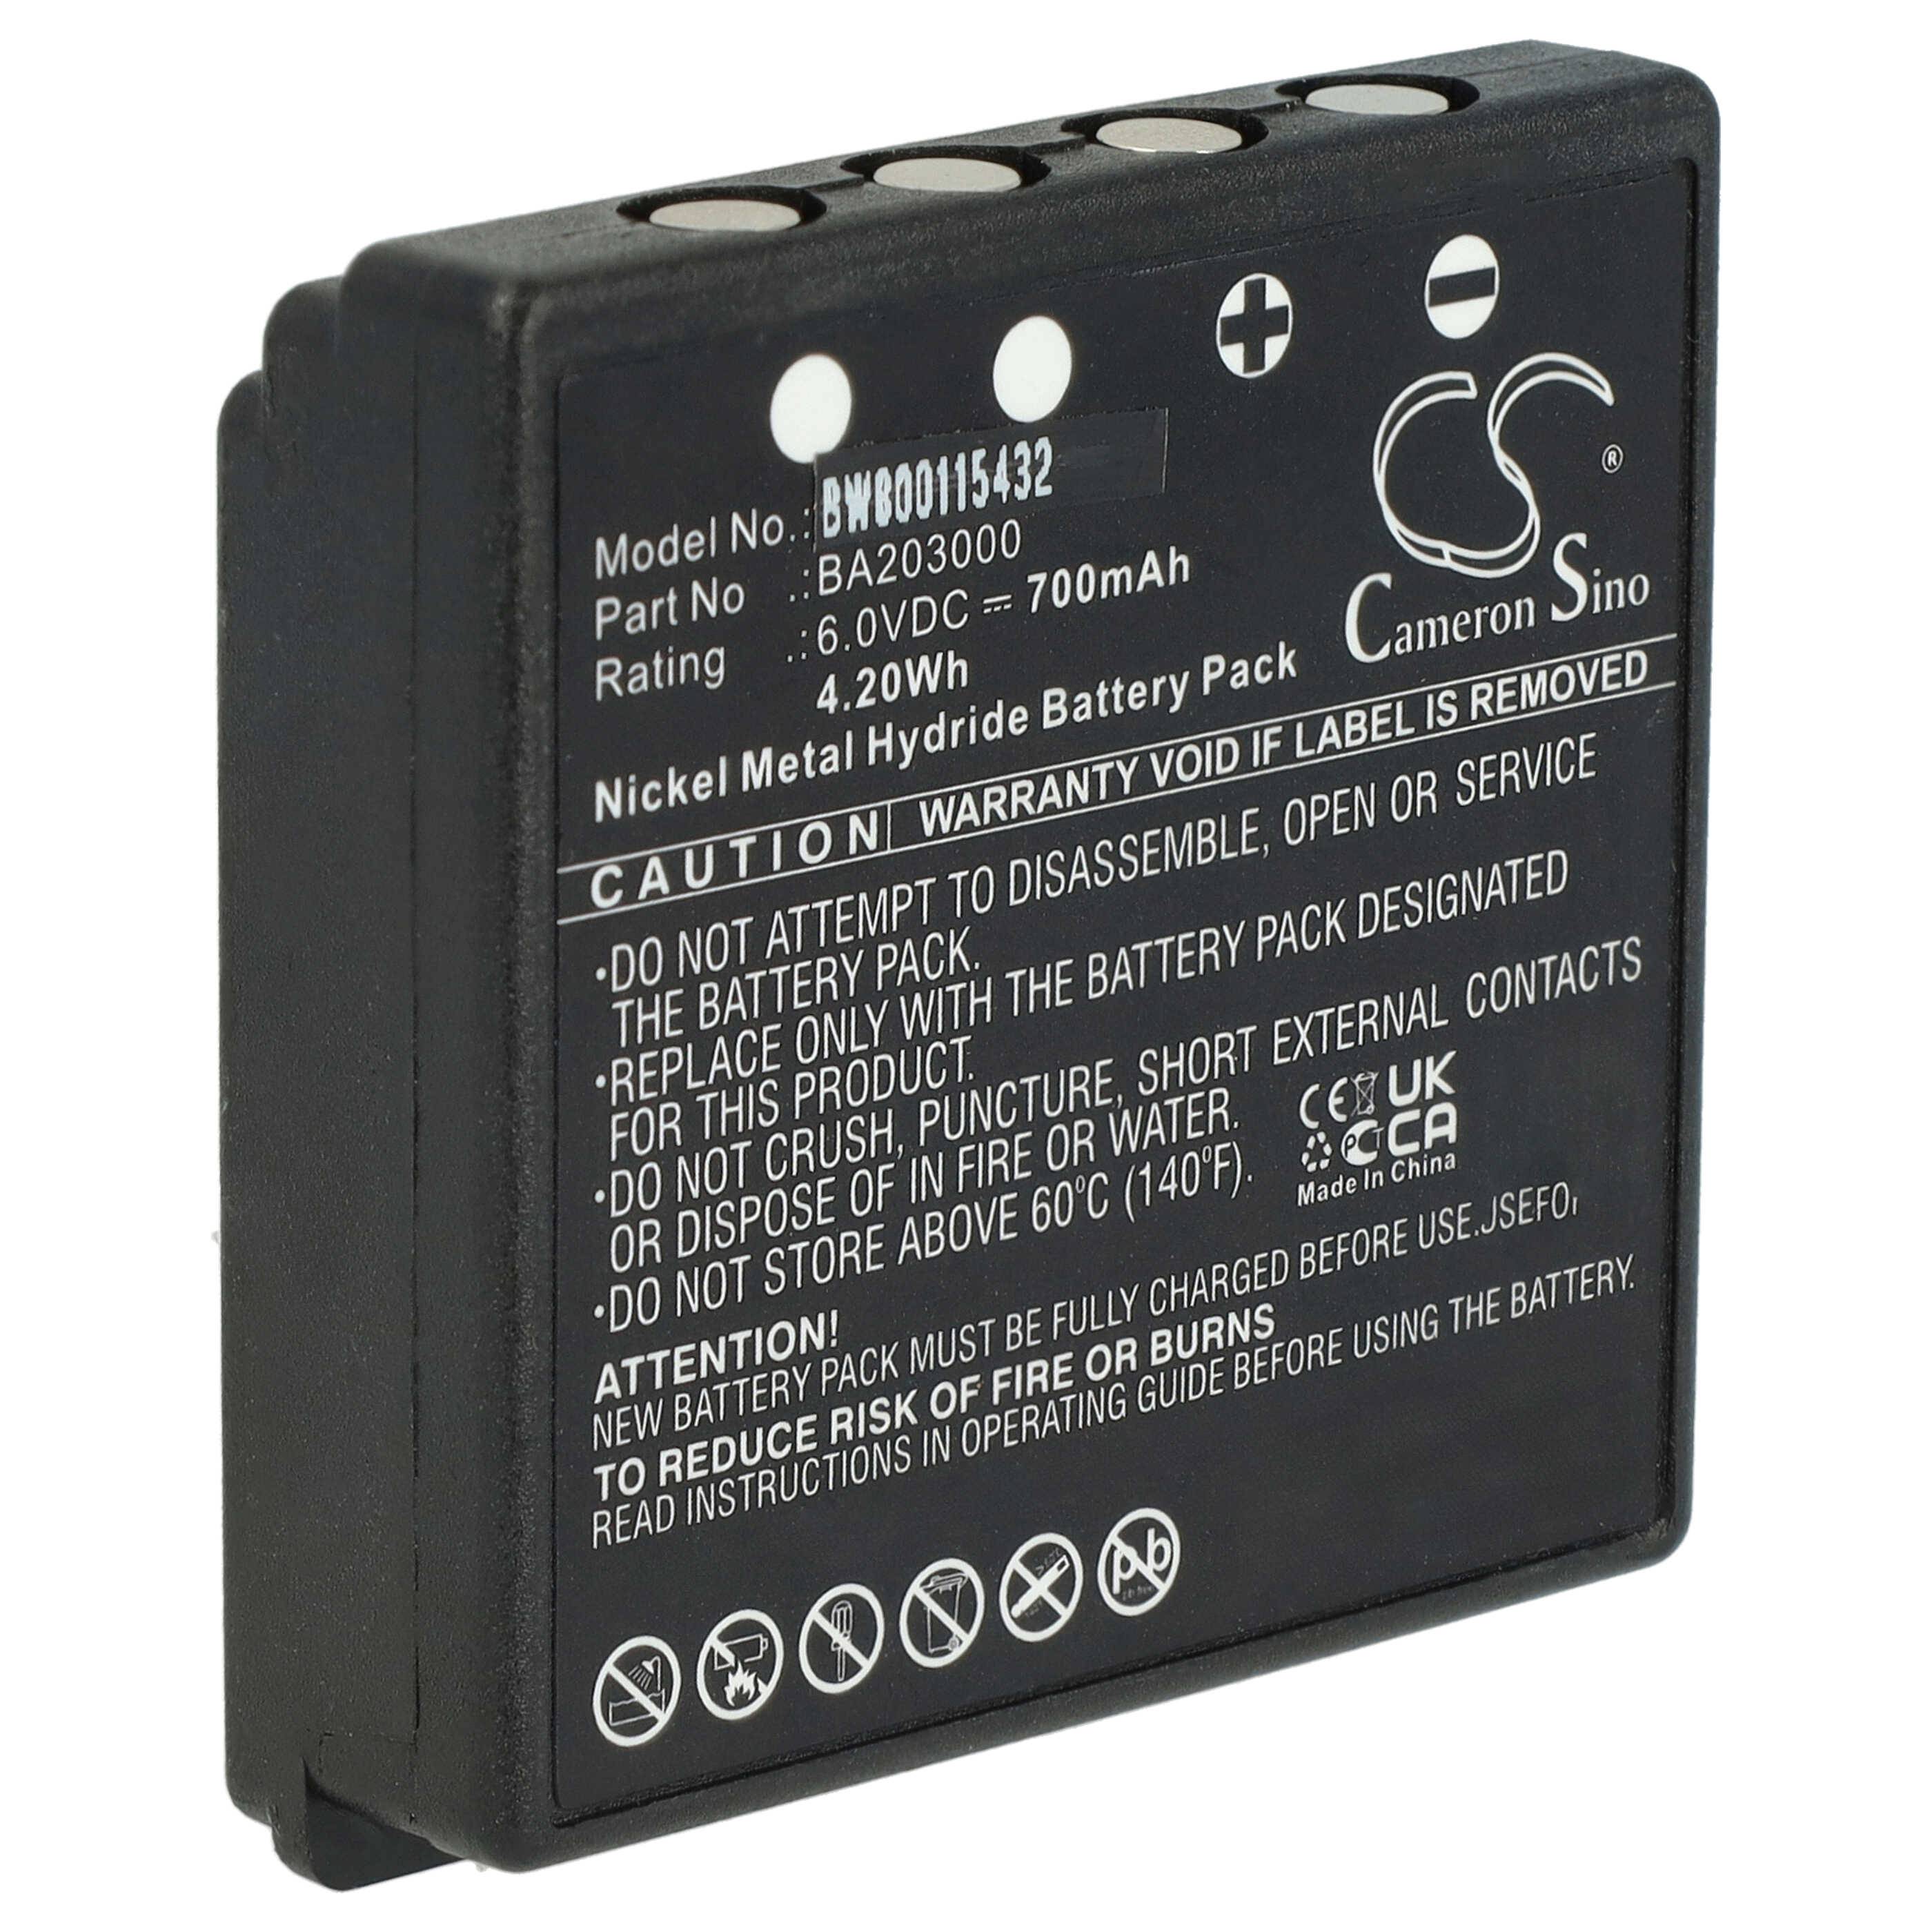 Industrial Remote Control Battery Replacement for HBC BA203000, BA205030, 005-01-00615 - 700mAh 6V NiMH